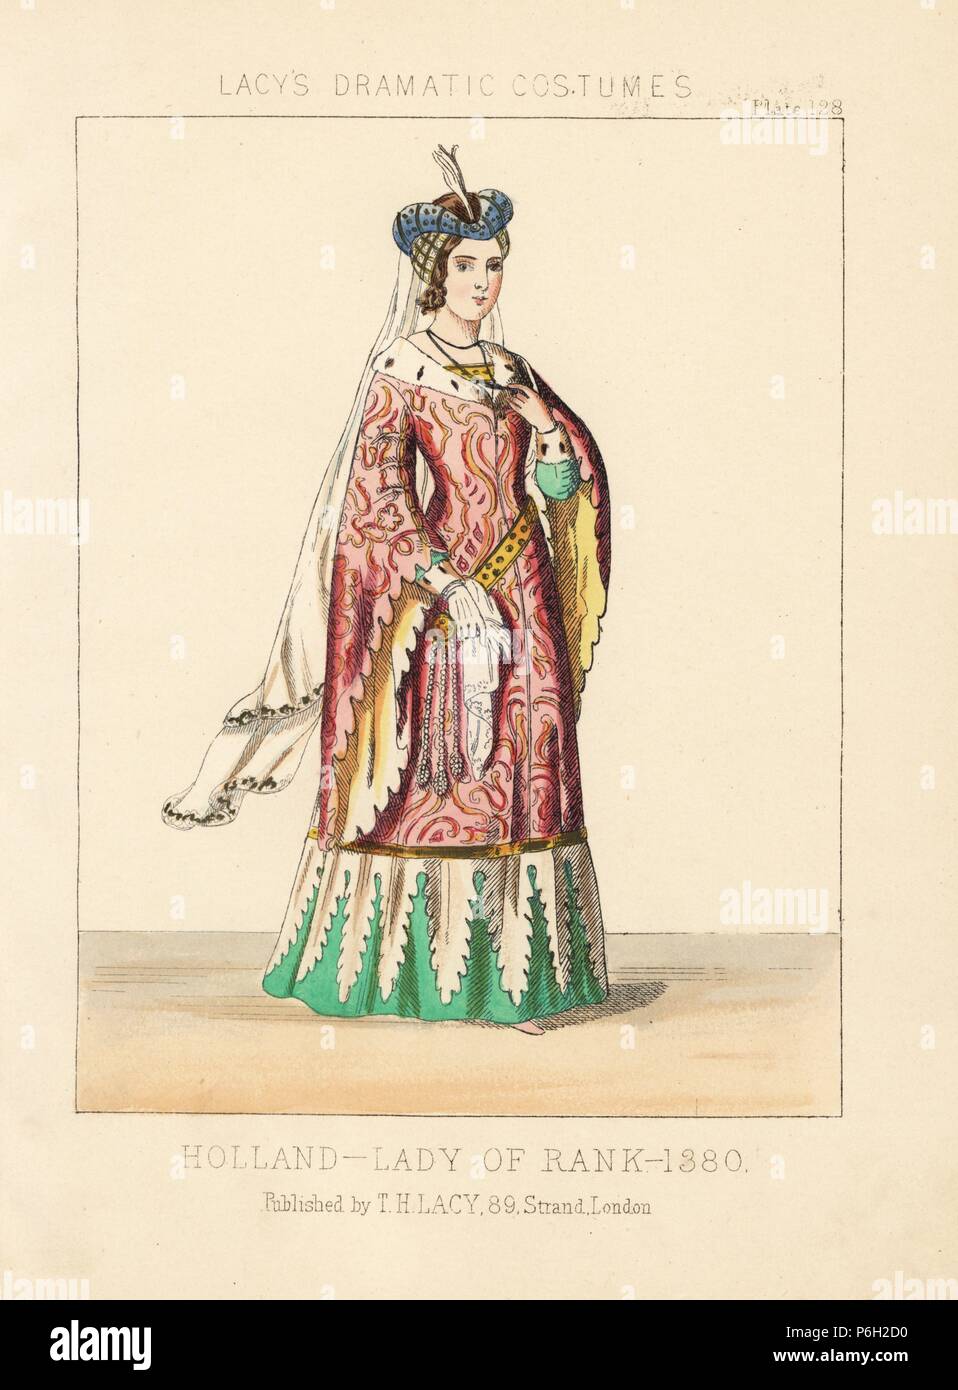 Lady of rank, Holland, 1380. Handcoloured lithograph from Thomas Hailes Lacy's 'Female Costumes Historical, National and Dramatic in 200 Plates,' London, 1865. Lacy (1809-1873) was a British actor, playwright, theatrical manager and publisher. Stock Photo